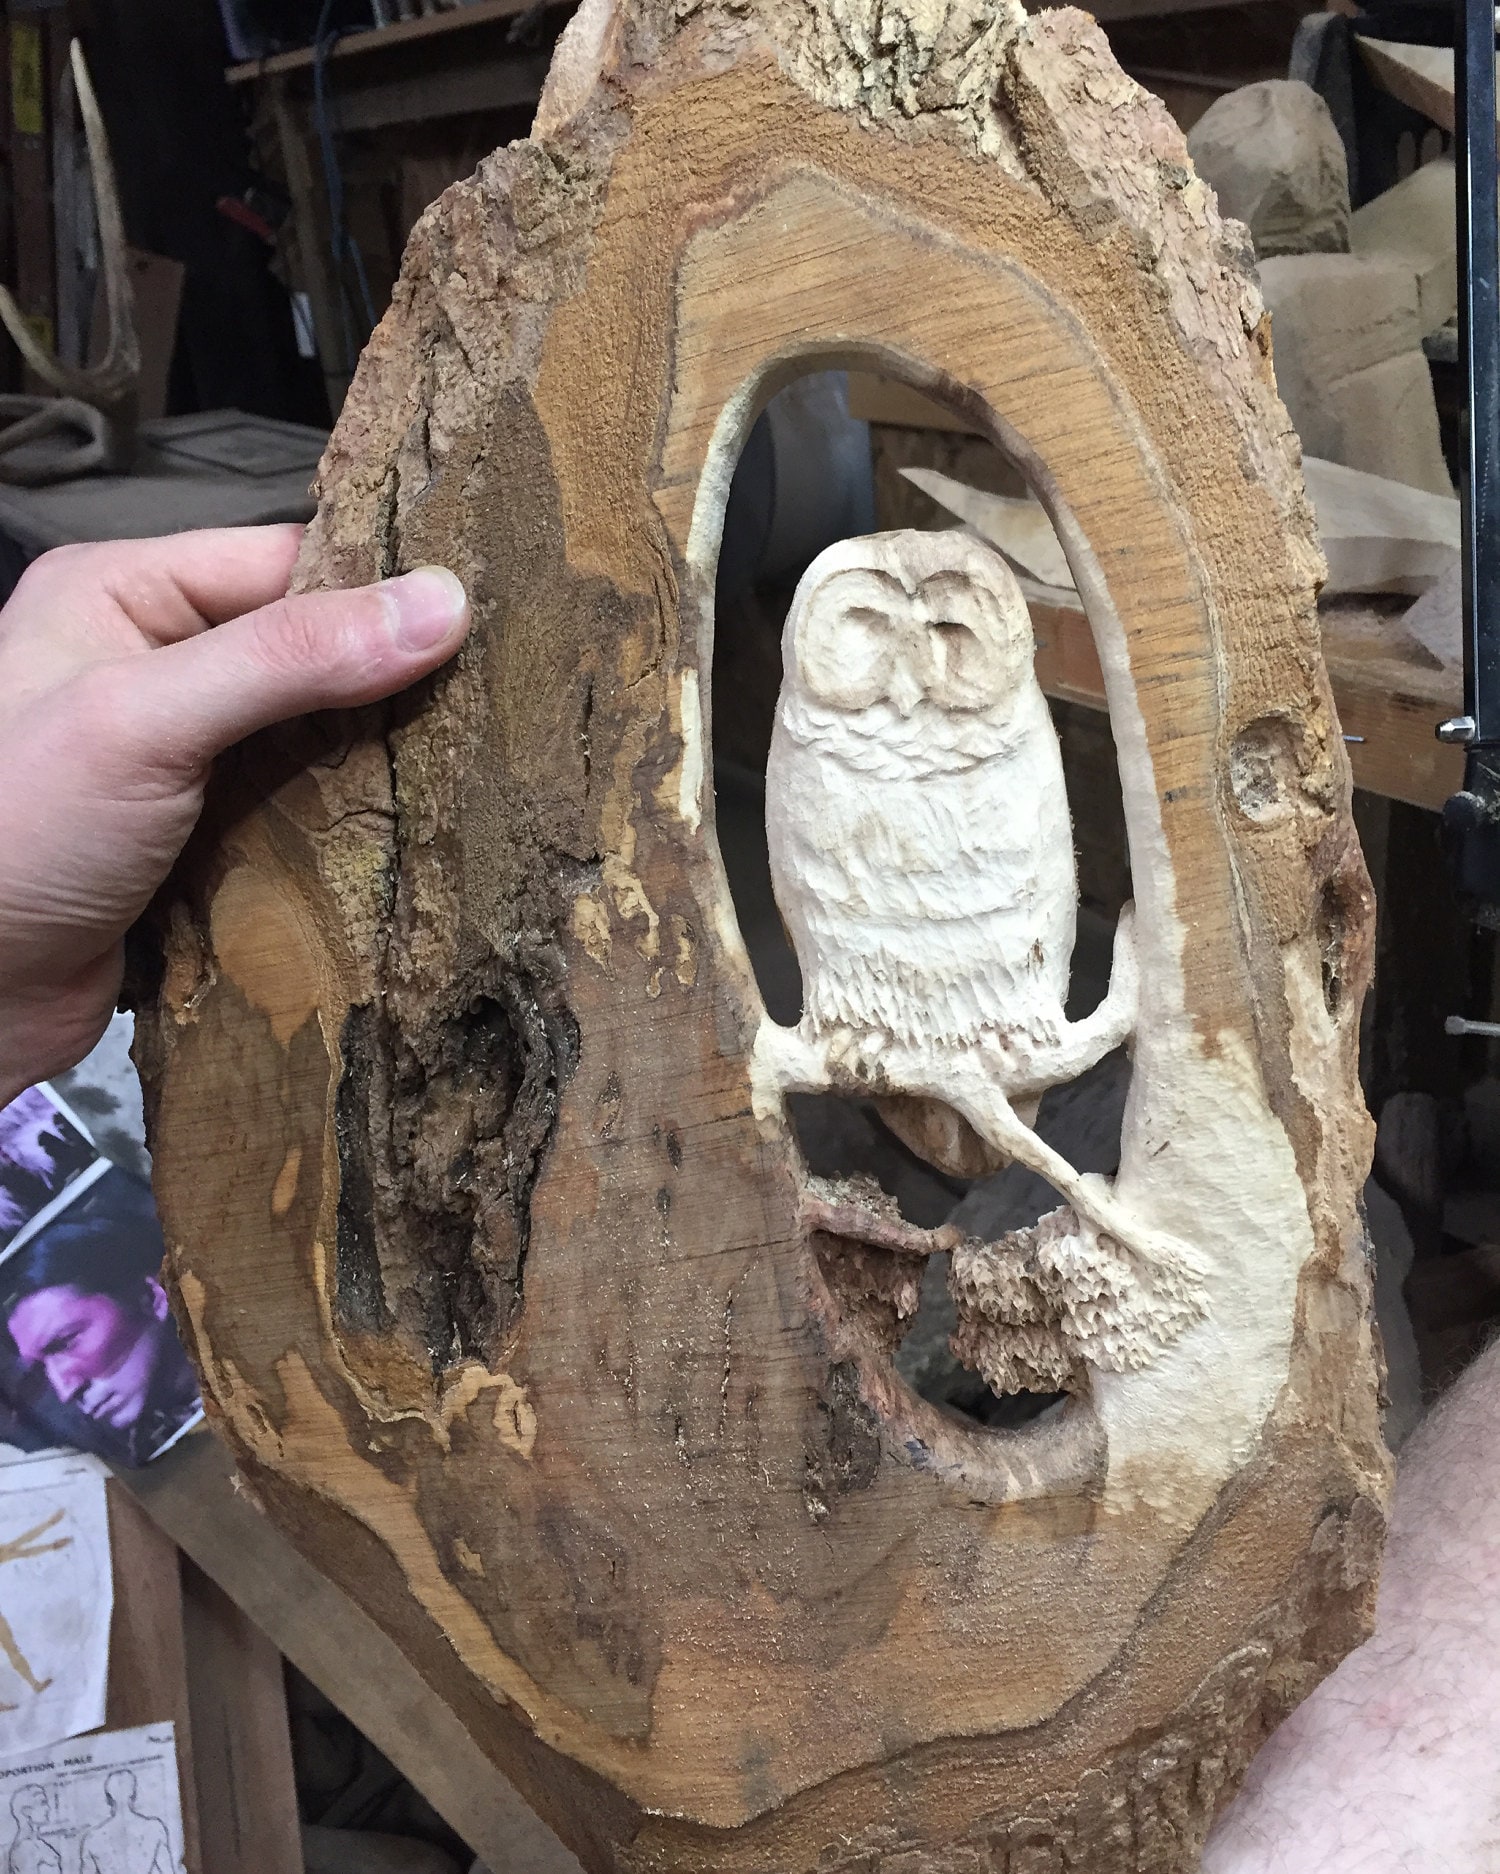 I have shaped the owl and the branches quite a bit at this stage of the carving. A little detail has creeped its way in there, with lots more detailing to go. This part is the most tedious and time-consuming aspect of this style of carving.